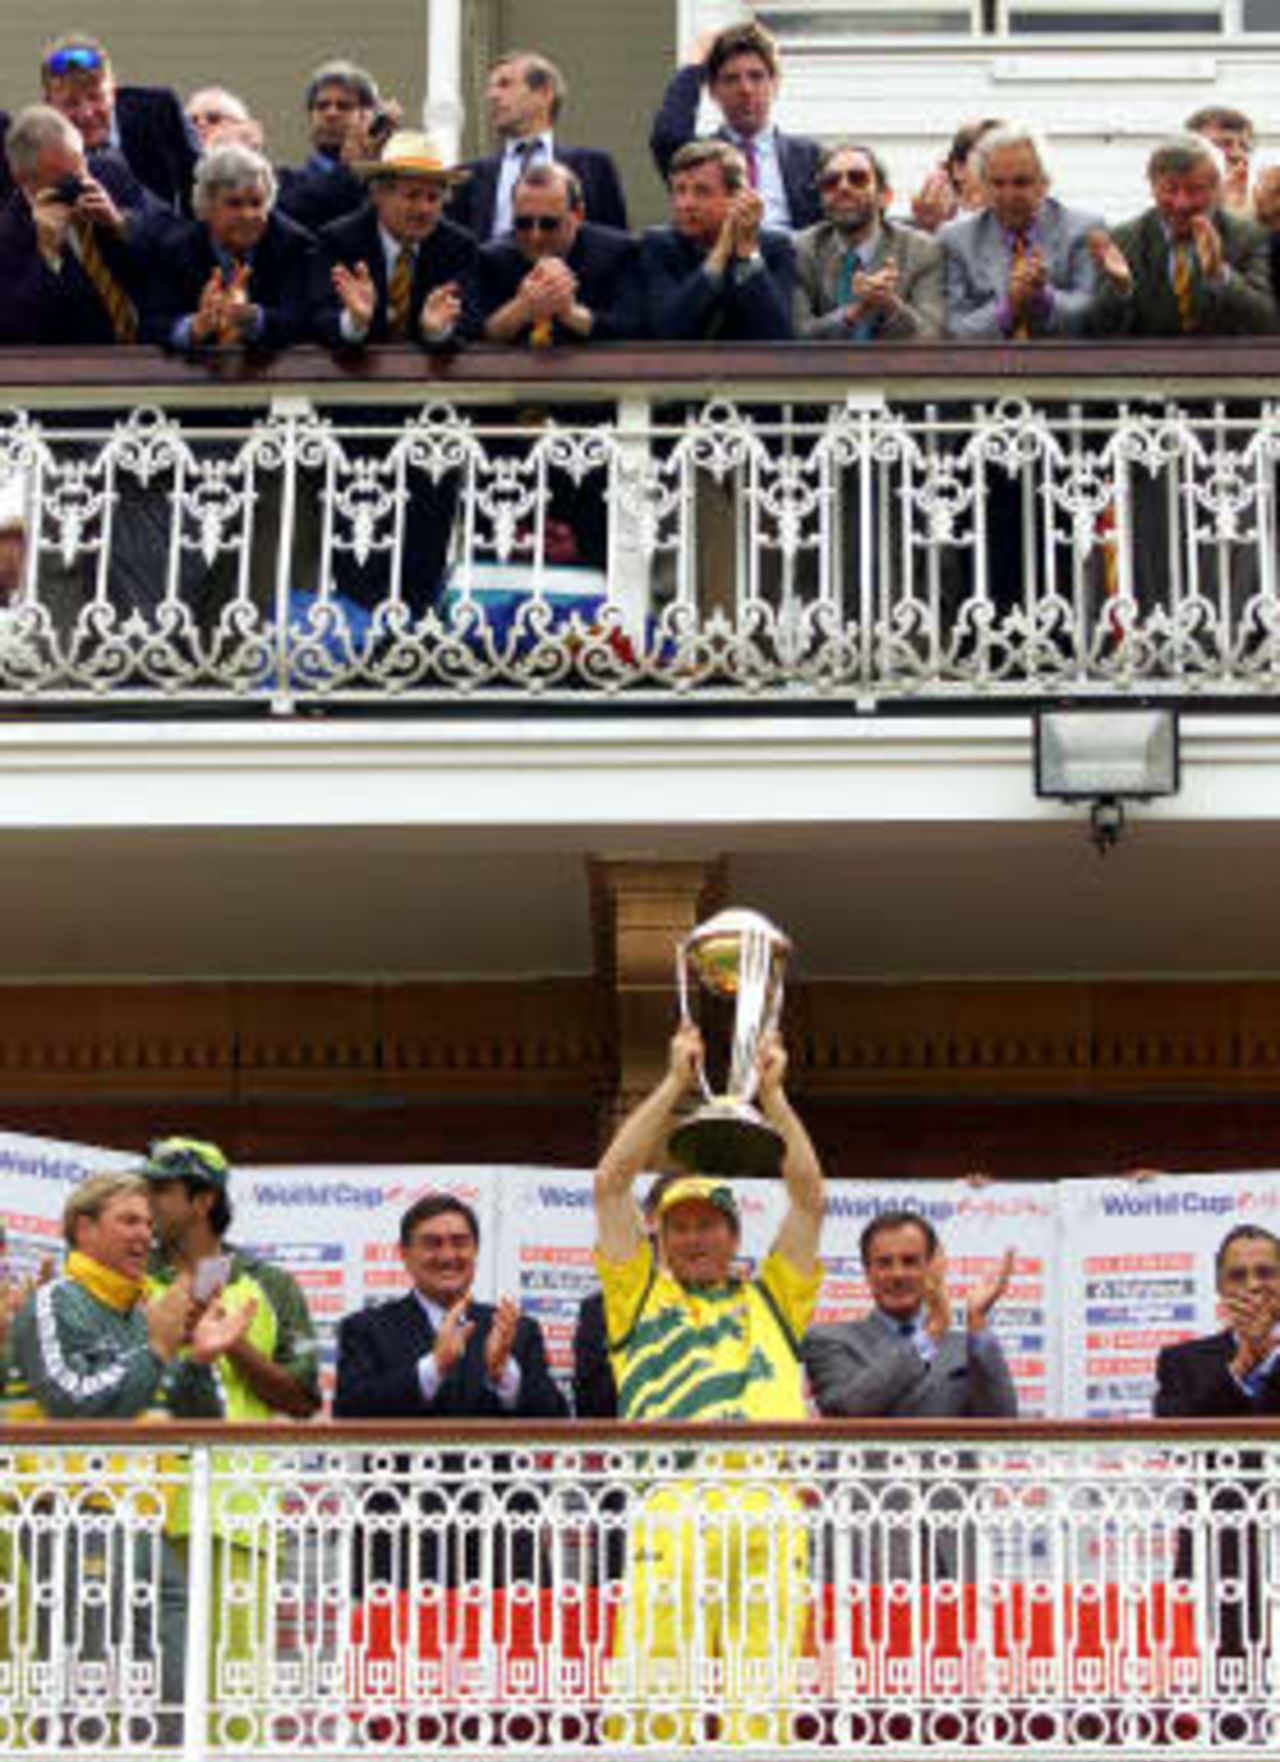 Australia's cricket captain Steve Waugh (Center) proudly presents the World Cup trophy on the balcony of Lords after Australia defeated Pakistan by 8 wickets at Lords in London, 20 June 1999.